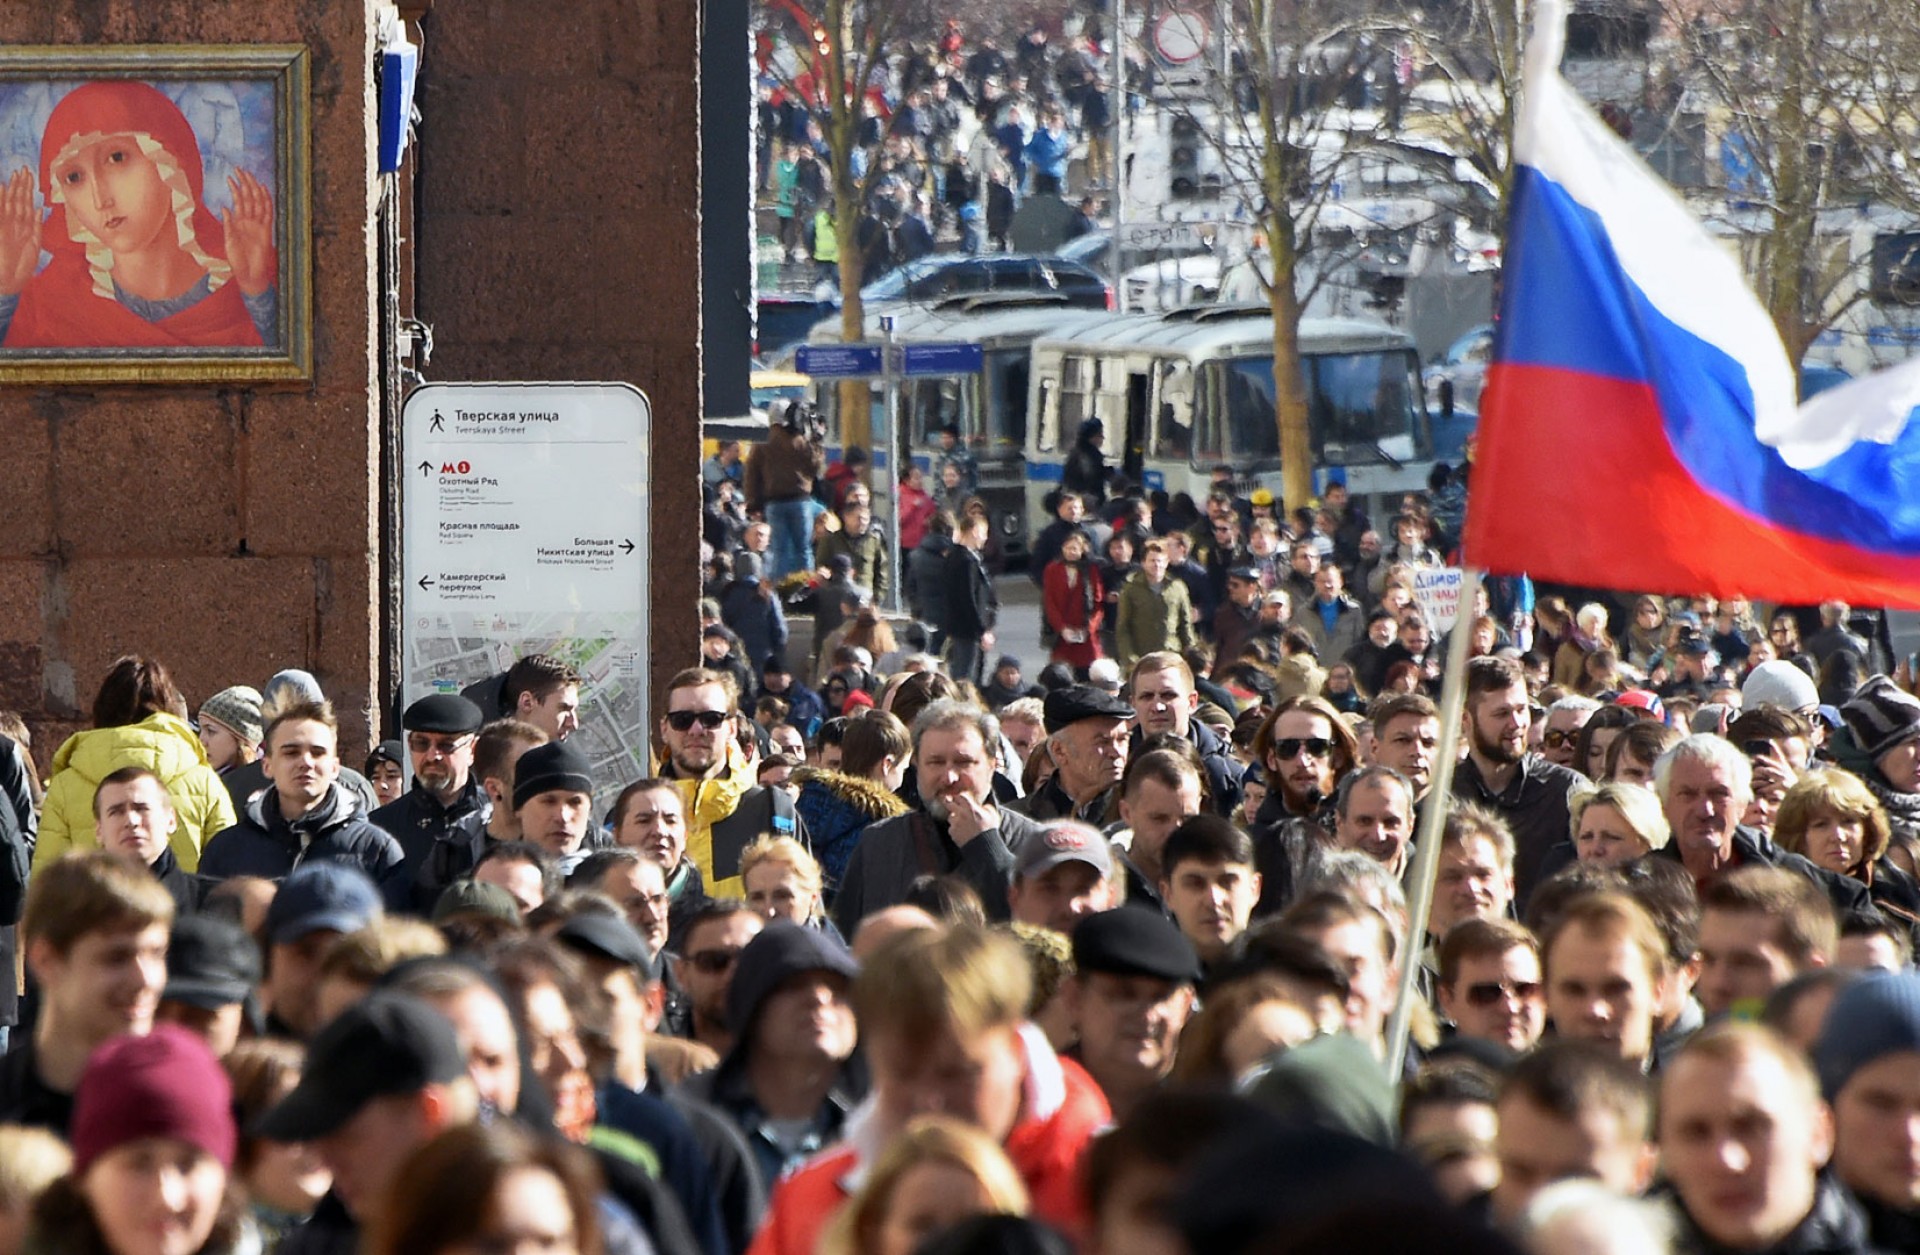 Protesters gathered by the thousands in cities across Russia on March 26 to demonstrate against government corruption. Though the protests were far smaller than the mass demonstrations that rocked the Kremlin in 2011-12, they were more widespread.